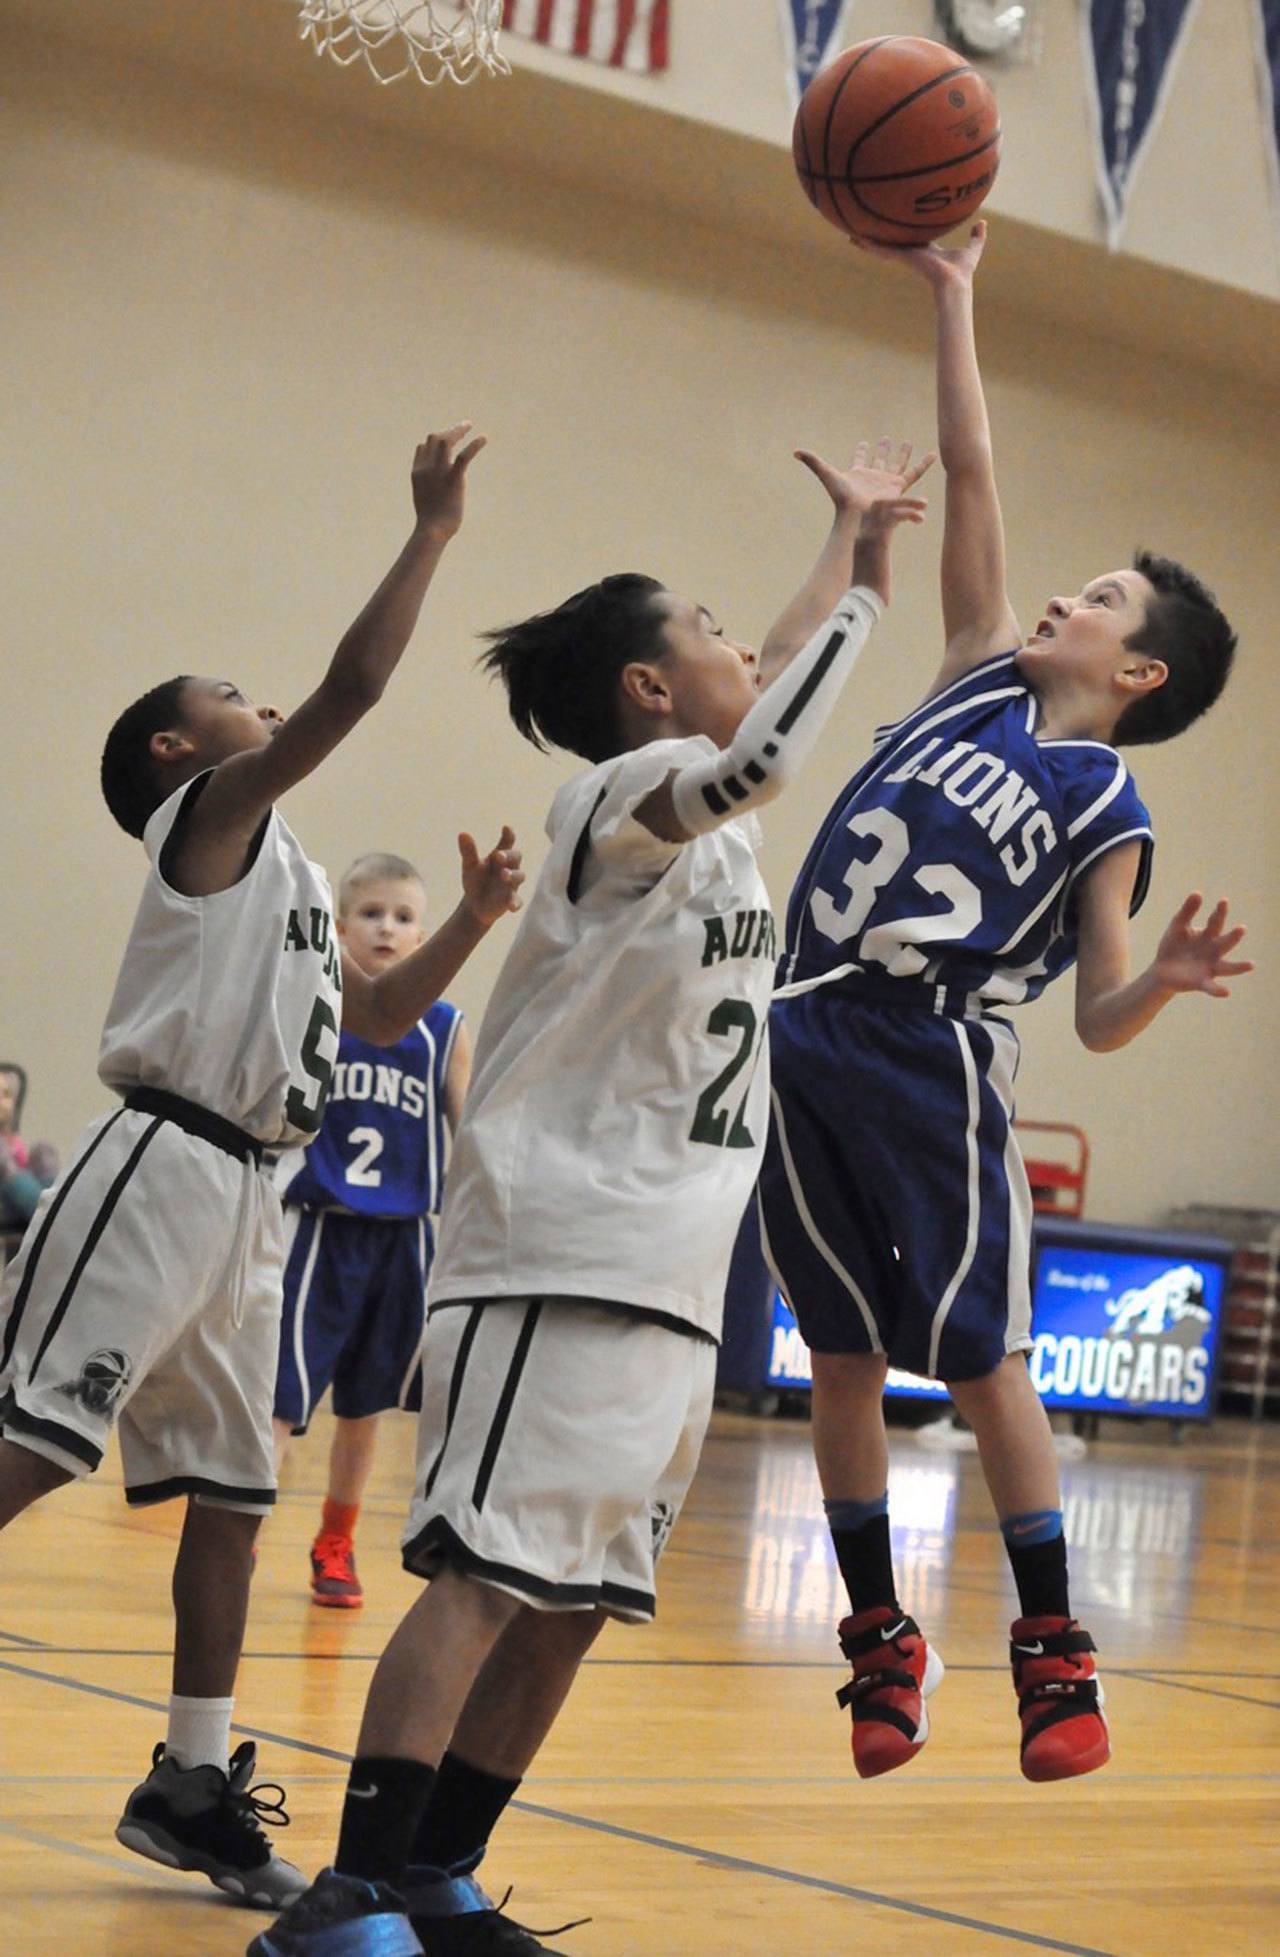 The third-grade ABA Green team contests a shot from a Mountainview Lion during ABA Auburn Select Youth Basketball action on Saturday. RACHEL CIAMPI, Auburn Reporter